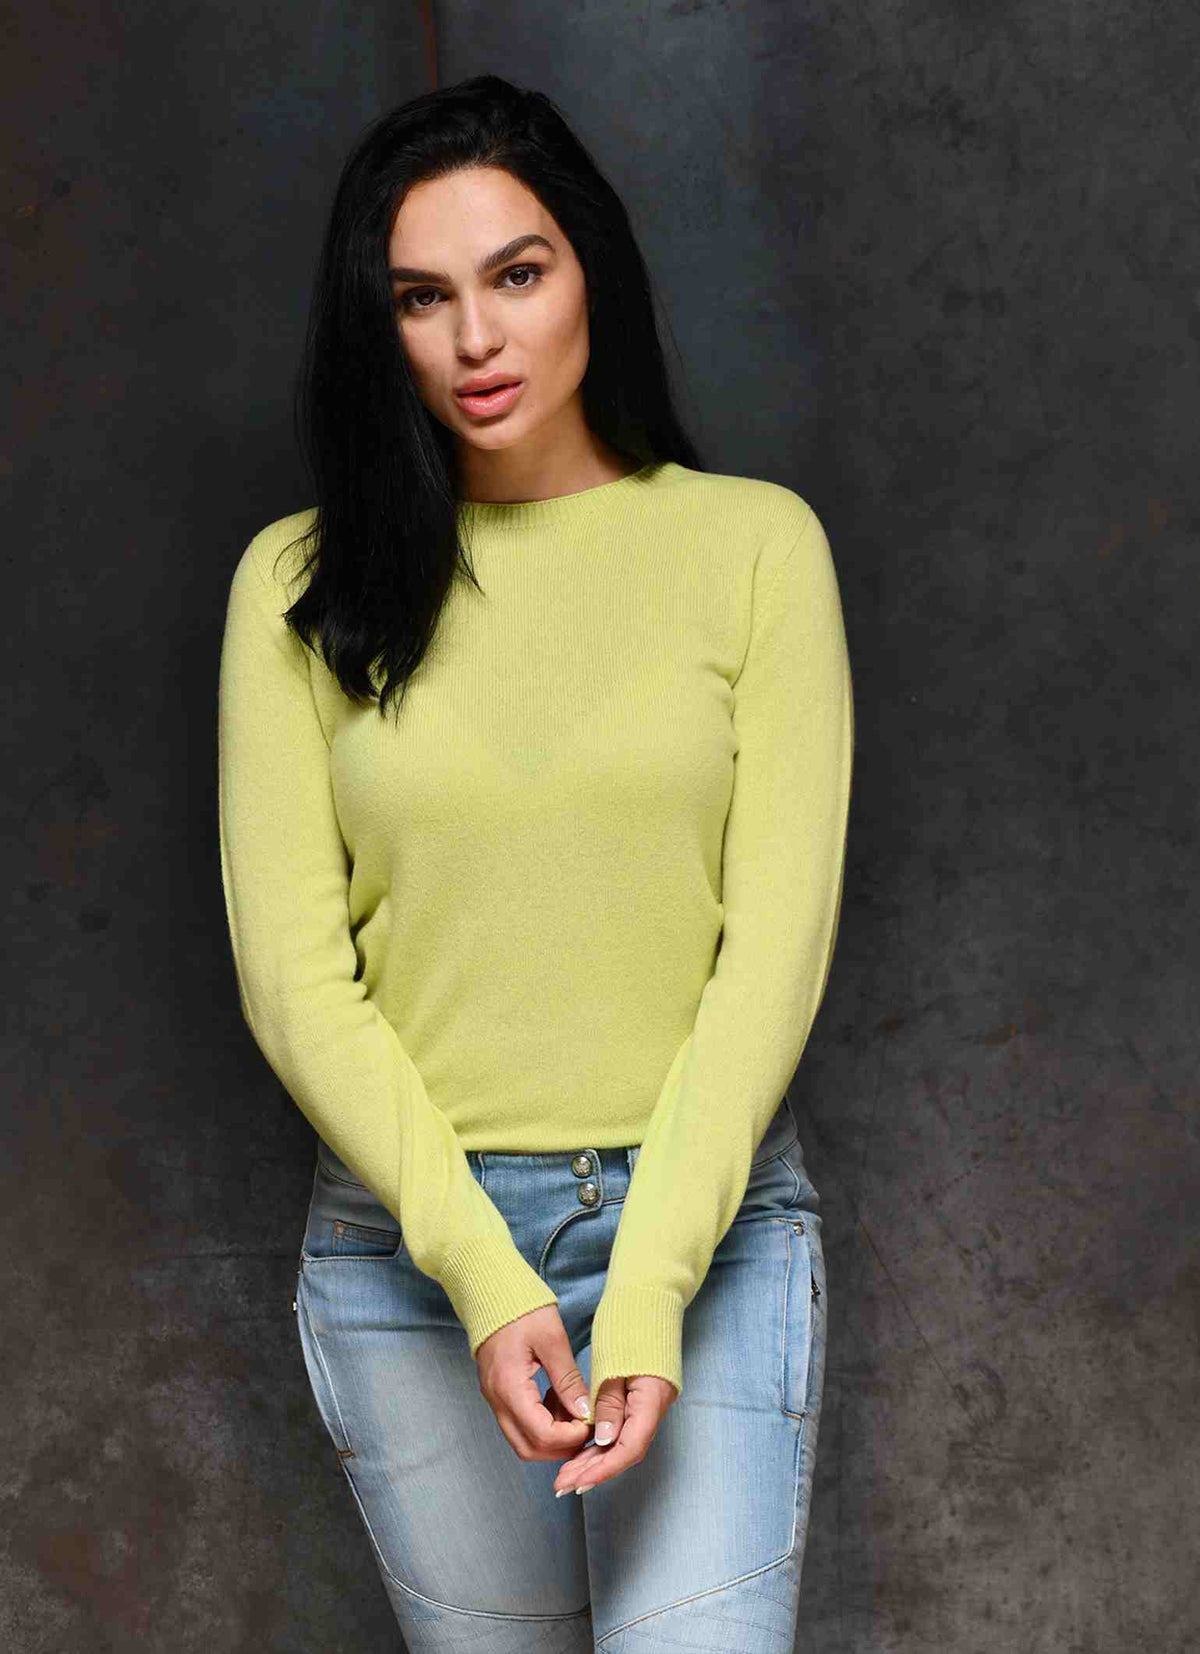 Women wearing Yellow round neck cashmere sweaters which are made in Italy